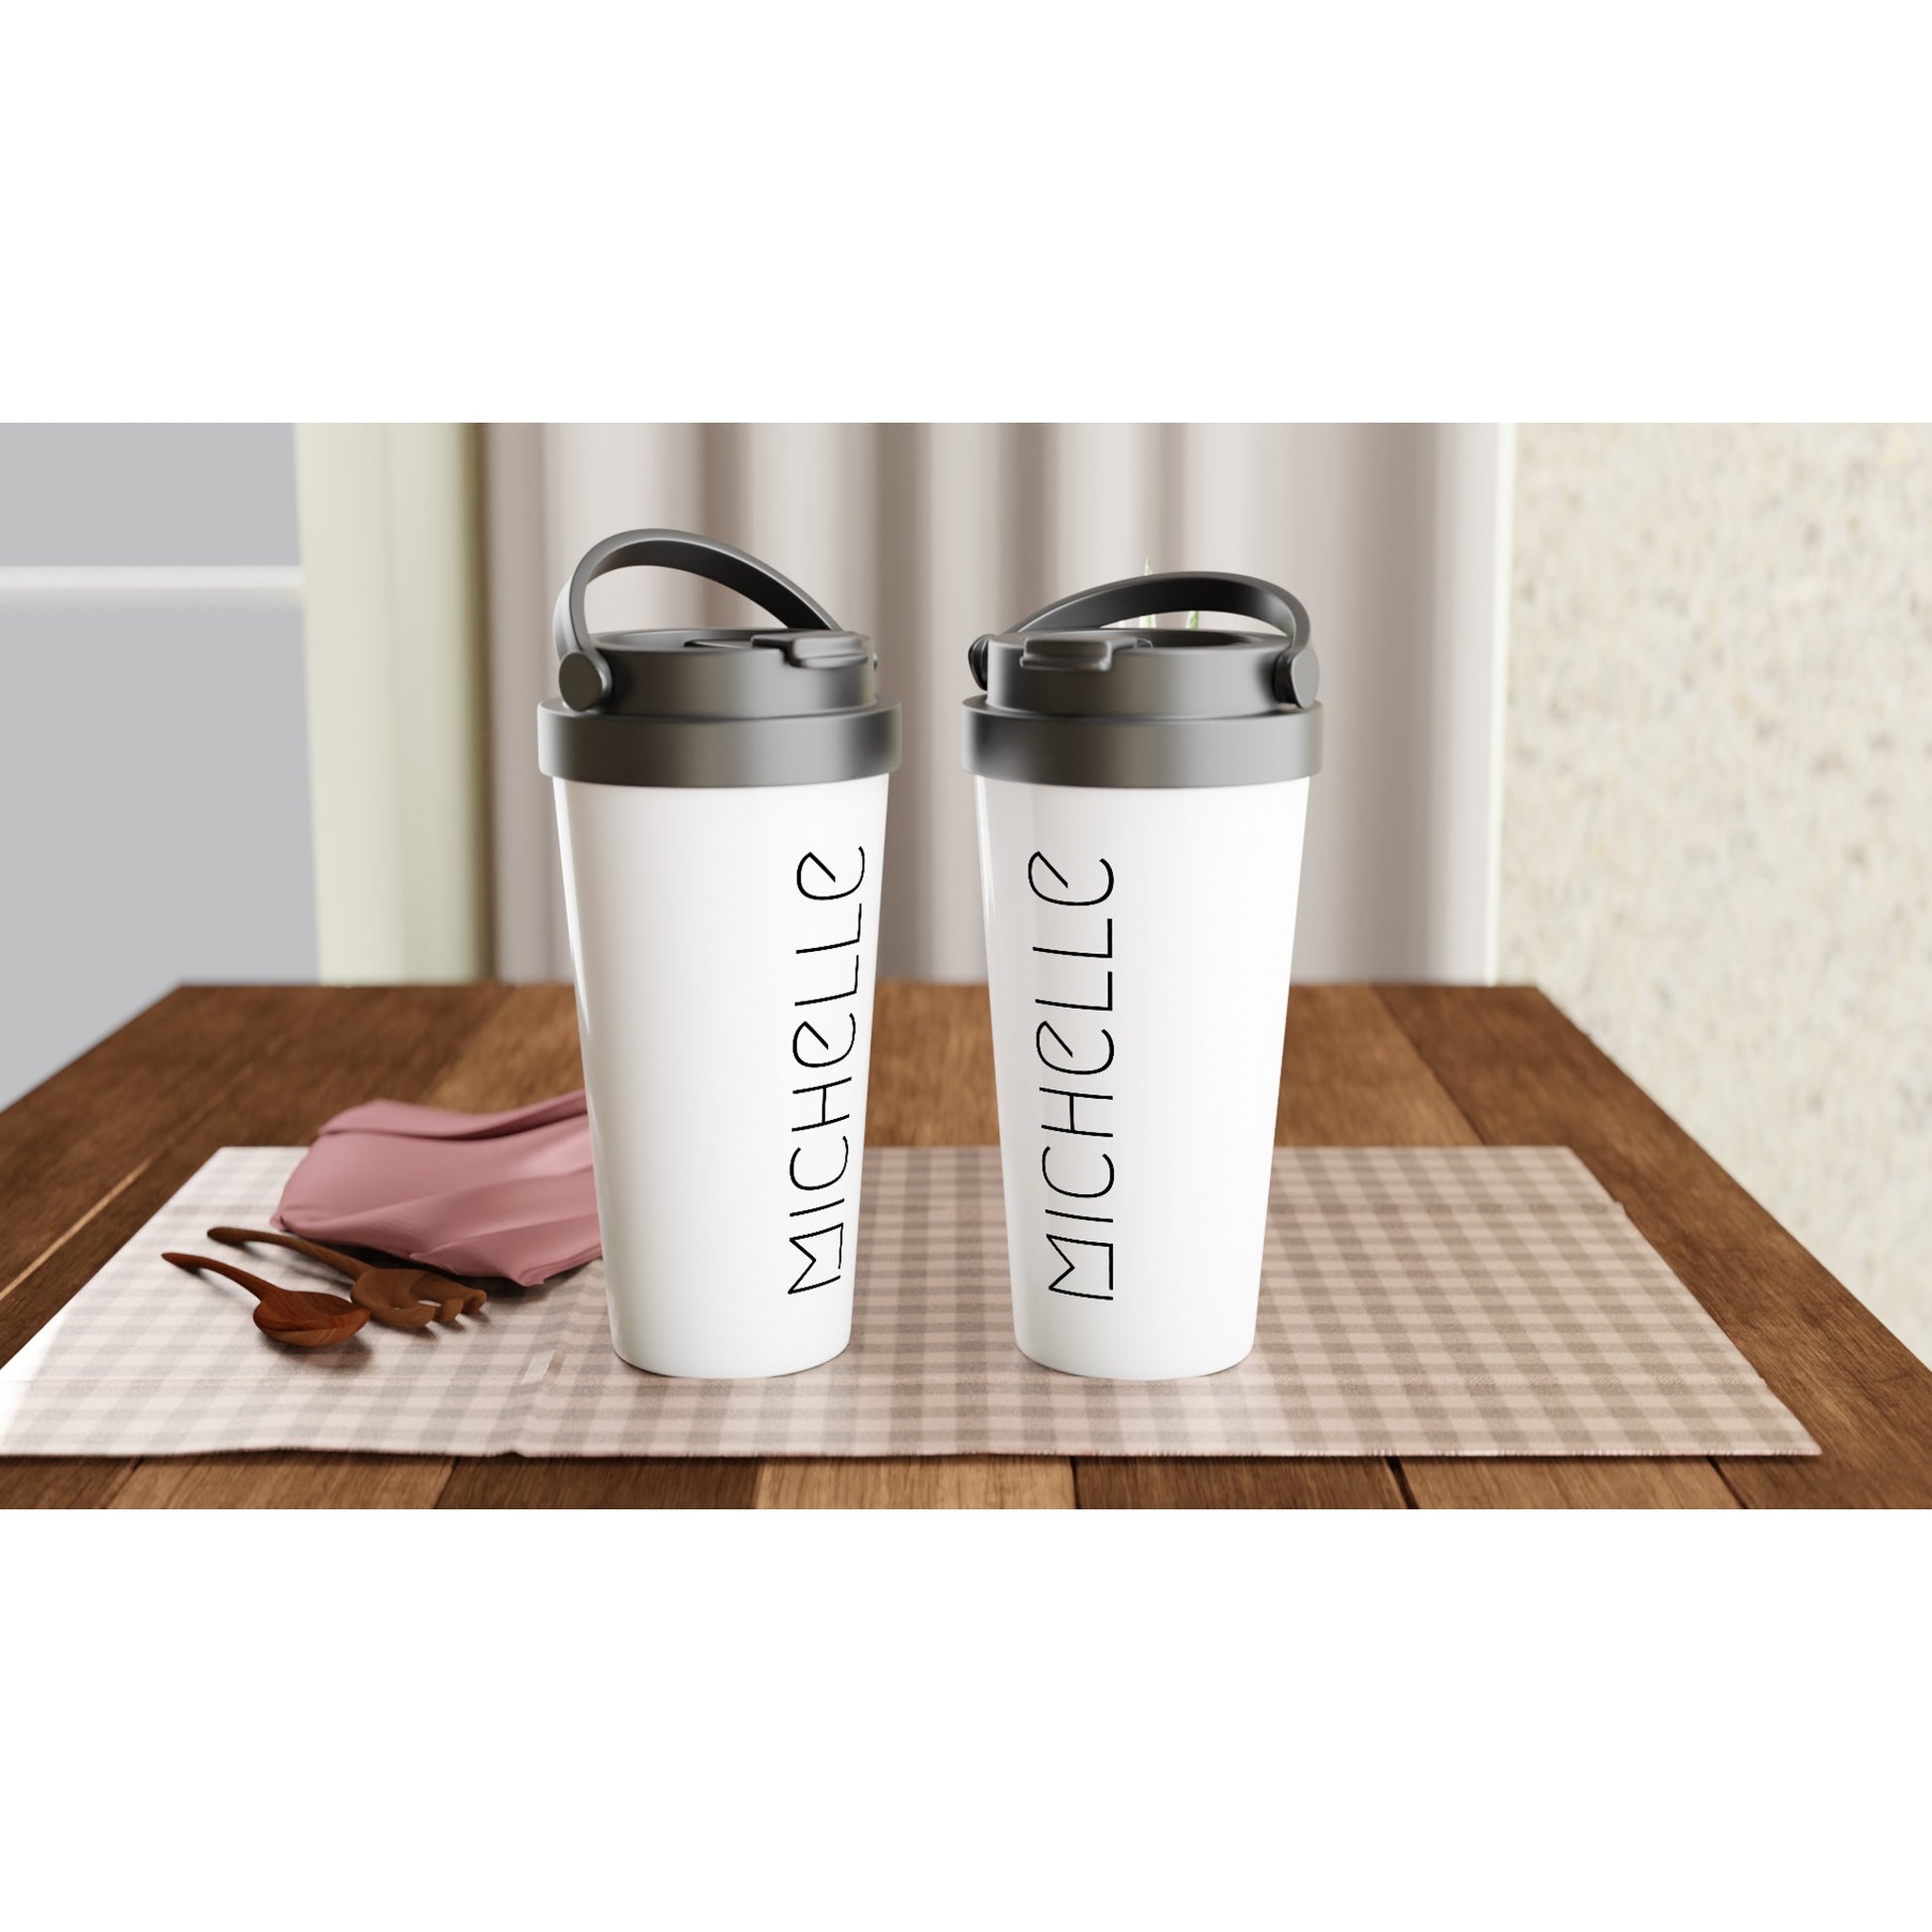 Personalise - Your Name - White 15oz Stainless Steel Travel Mug Personalised Travel Mug customise personalise